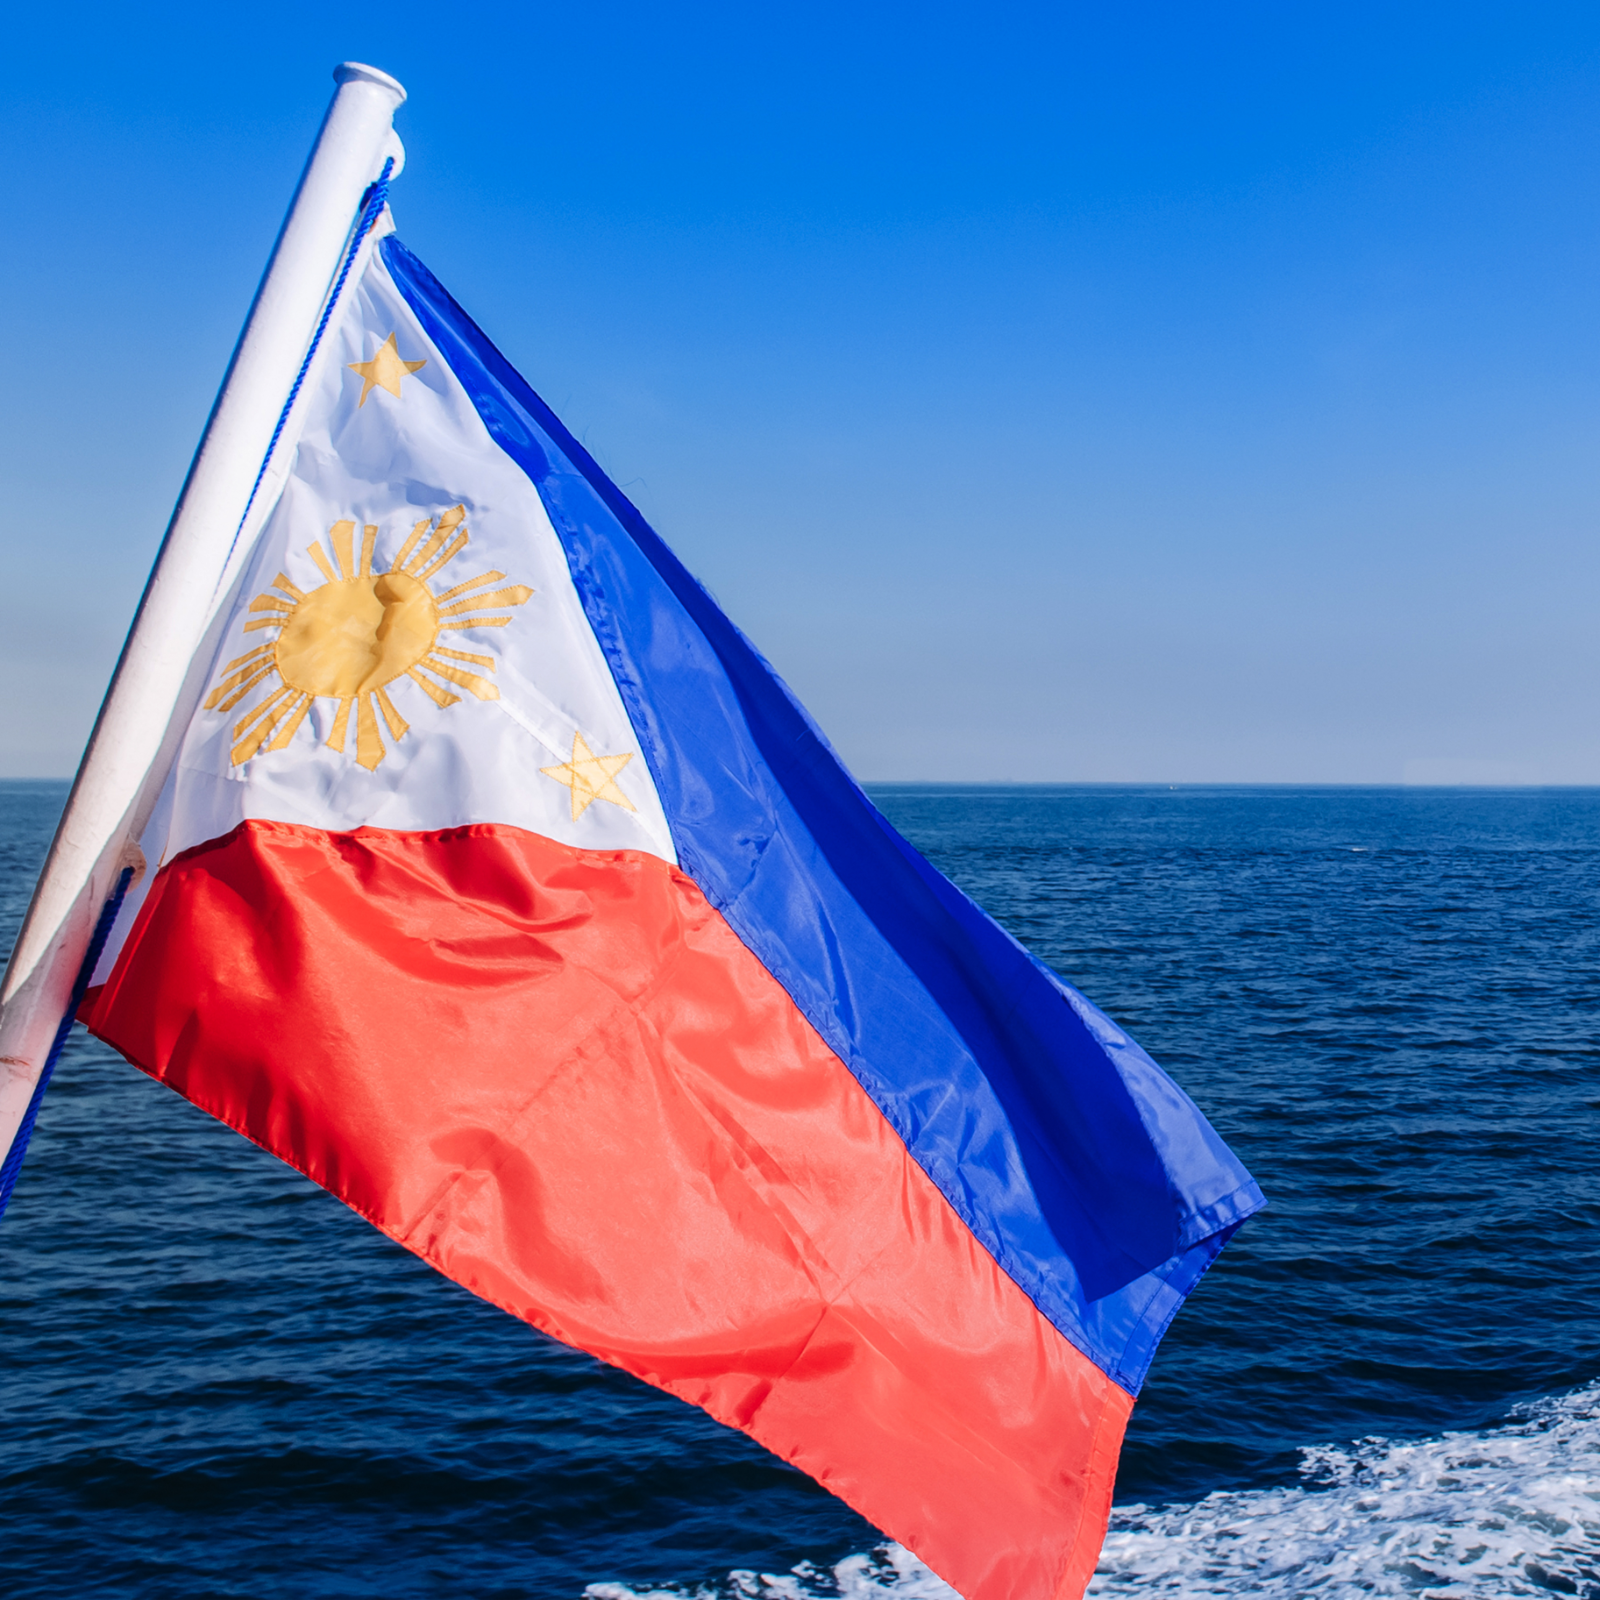 19 Companies Licensed to Operate Crypto Exchanges in Philippine Economic Zone